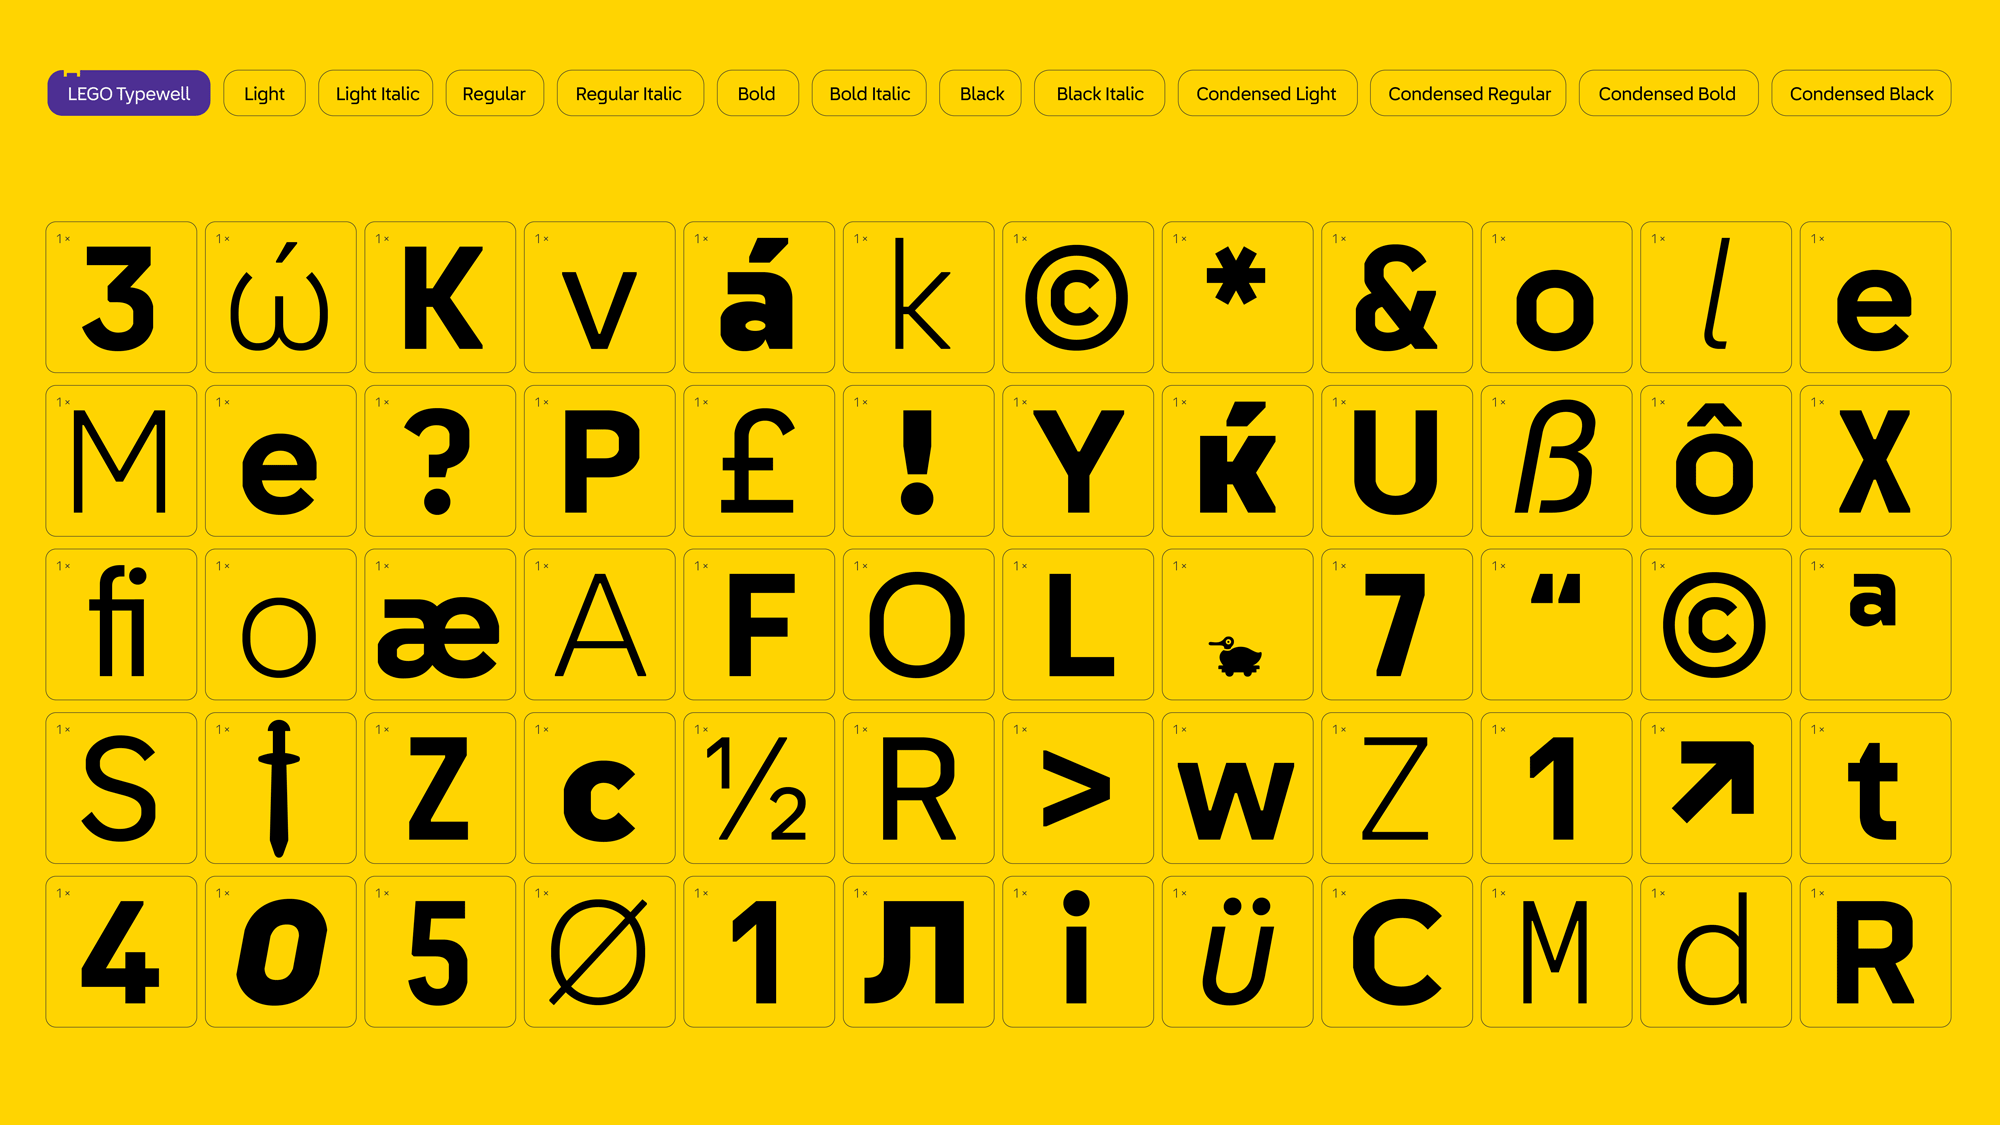 Brand identity development for Lego by Interbrand with custom typeface created by Colophon